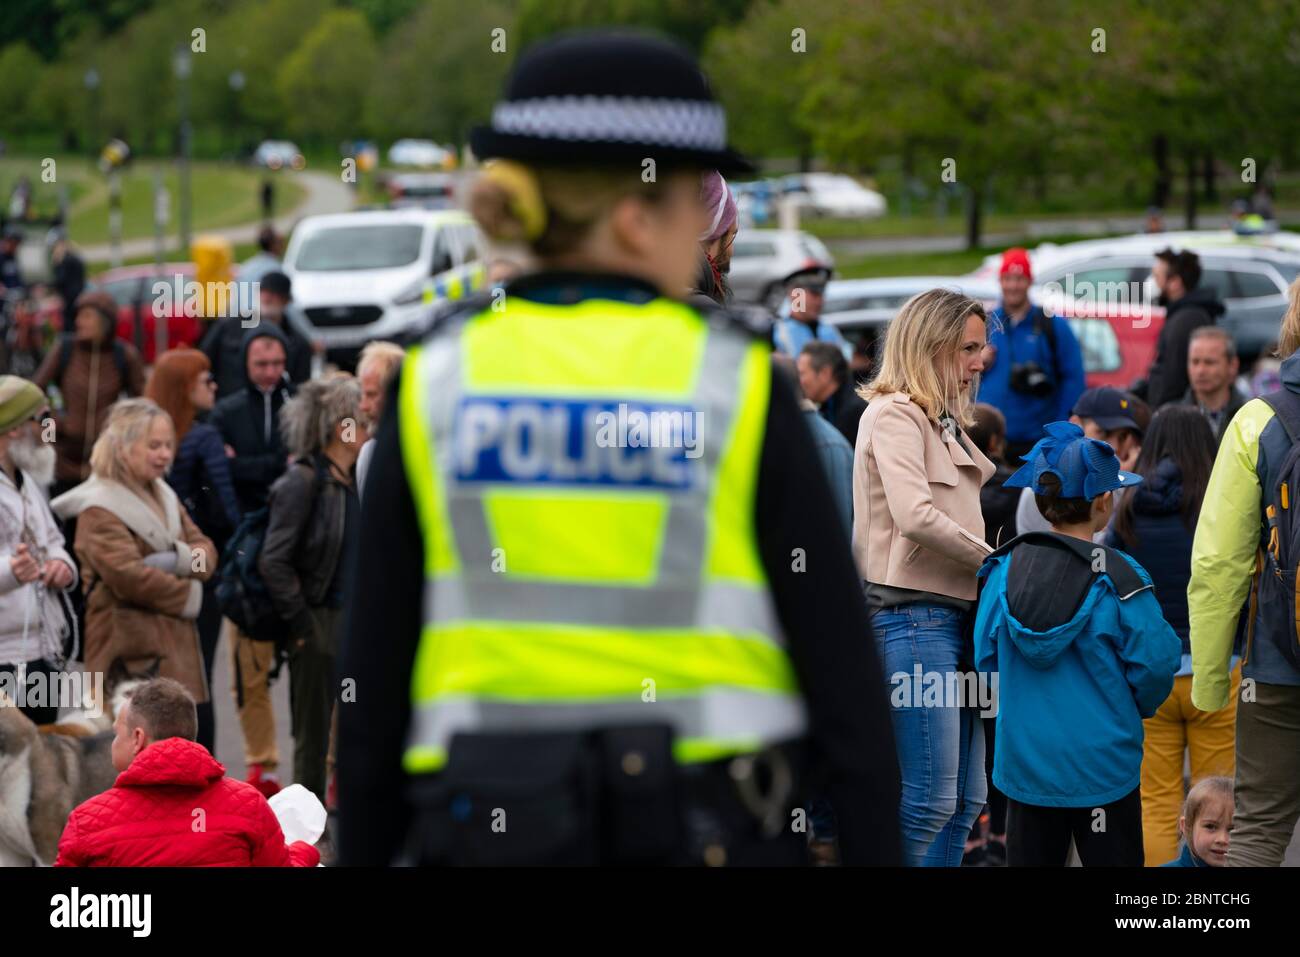 Edinburgh, Scotland, UK. Police watching over a small group of people in Holyrood Park. Possible that one or two members of the public were part of an anti-lockdown protest in the park that was promoted on Facebook this week. No large scale protest is visible in the park at the planned start time however. Iain Masterton/Alamy Live News Stock Photo